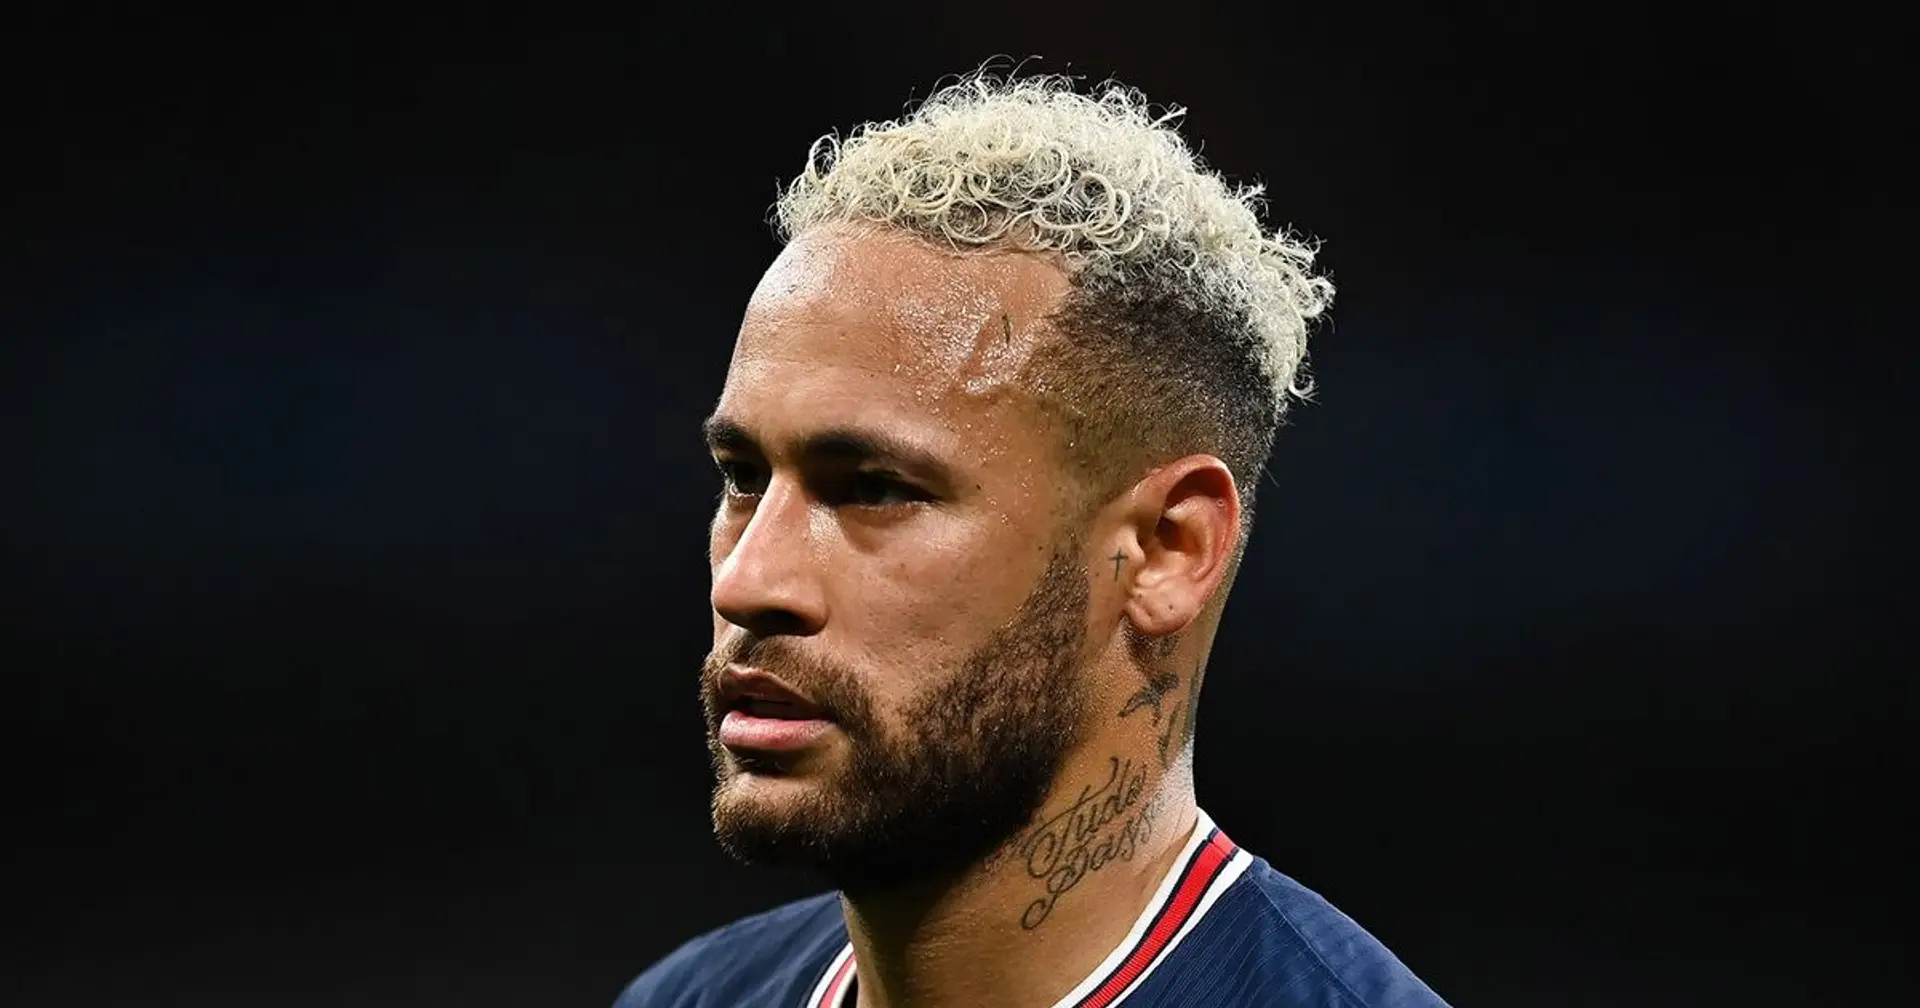 Neymar offered to Barca, club not too eager to bring him back (reliability: 4 stars)